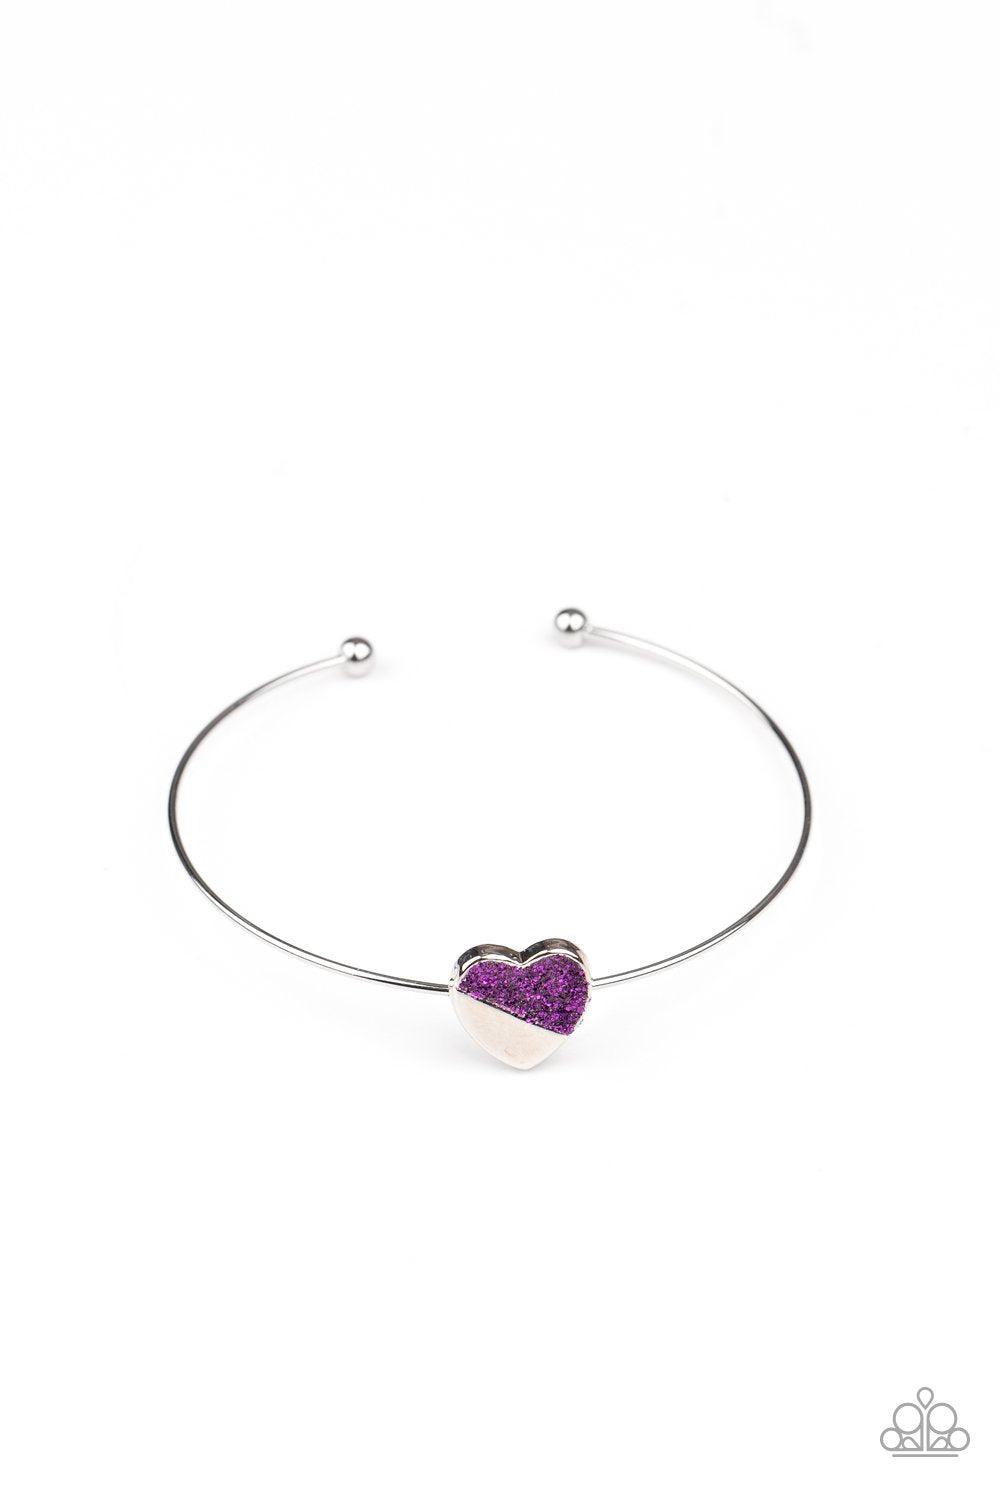 Starlet Shimmer Children&#39;s Silver and Heart Cuff Bracelets - Paparazzi Accessories (set of 5)-CarasShop.com - $5 Jewelry by Cara Jewels